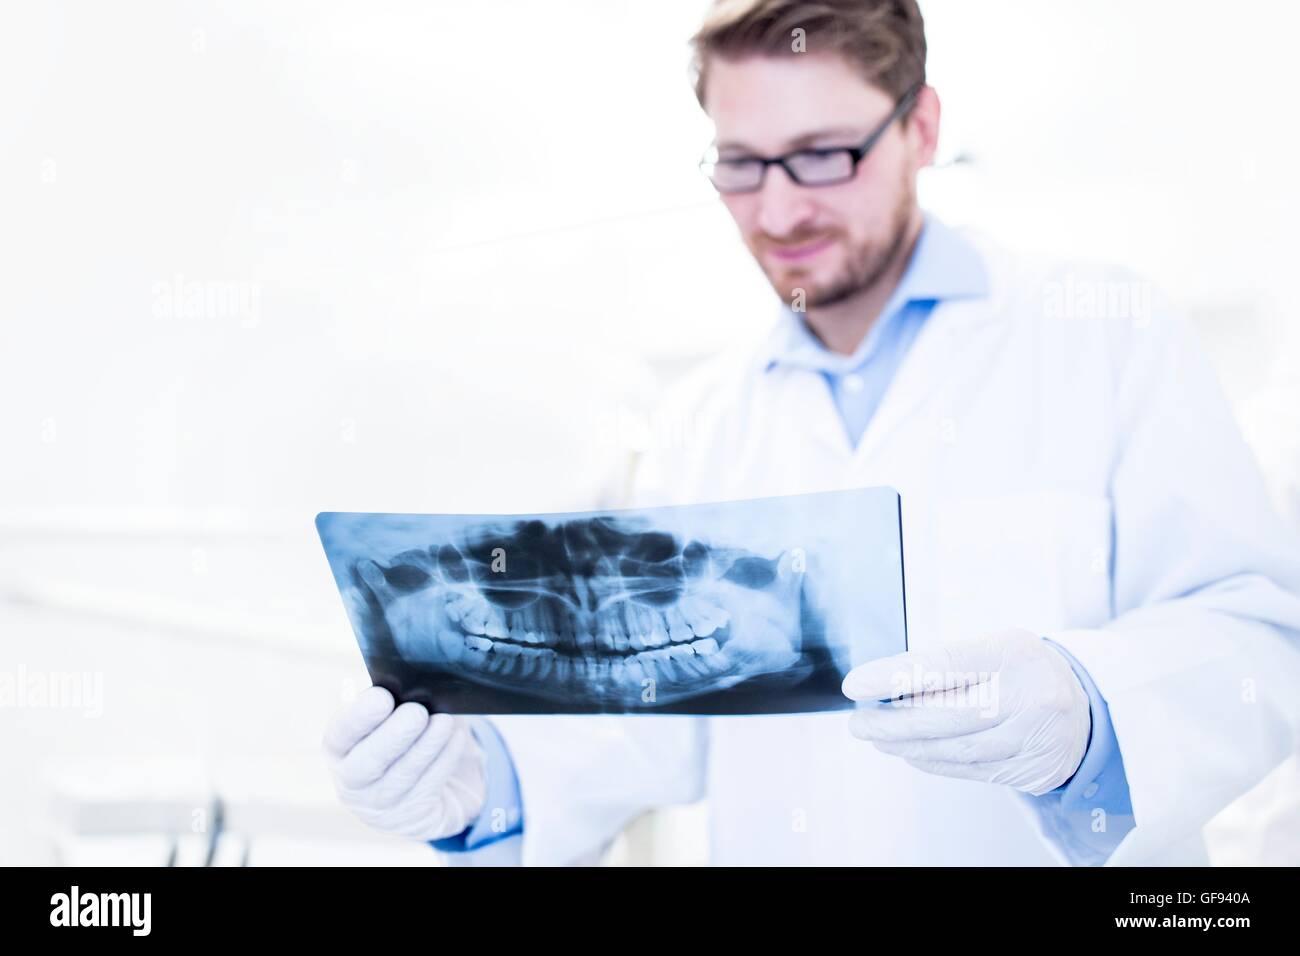 MODEL RELEASED. Dentist and dental assistant looking at x-ray image. Stock Photo